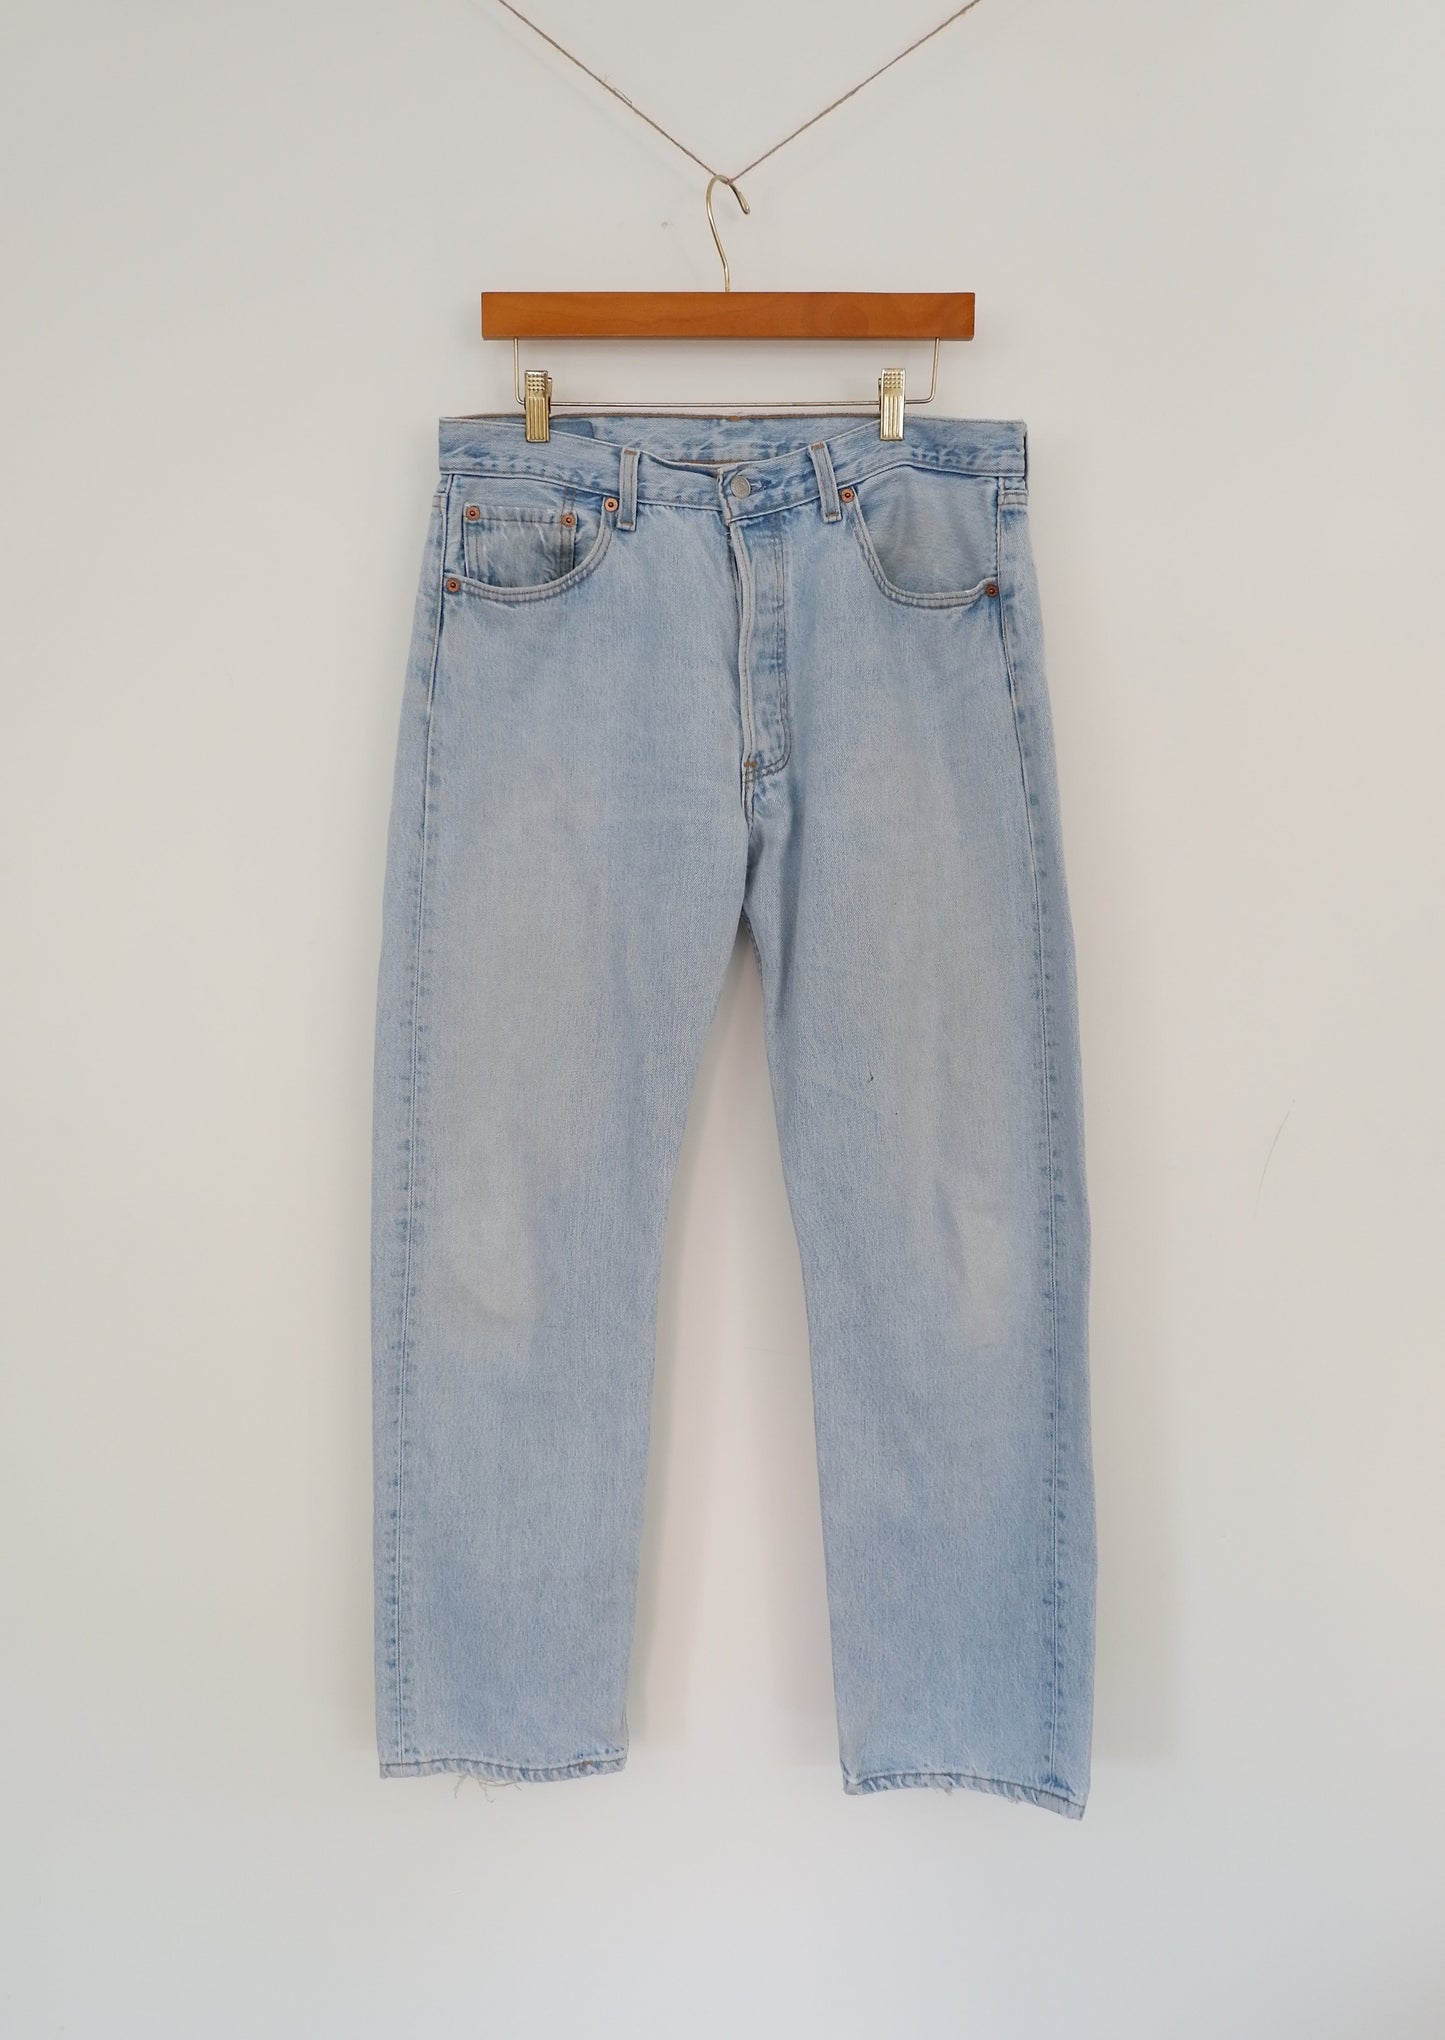 Levis Vintage 501 Light Wash Relaxed Fit Straight Leg Jeans - 34